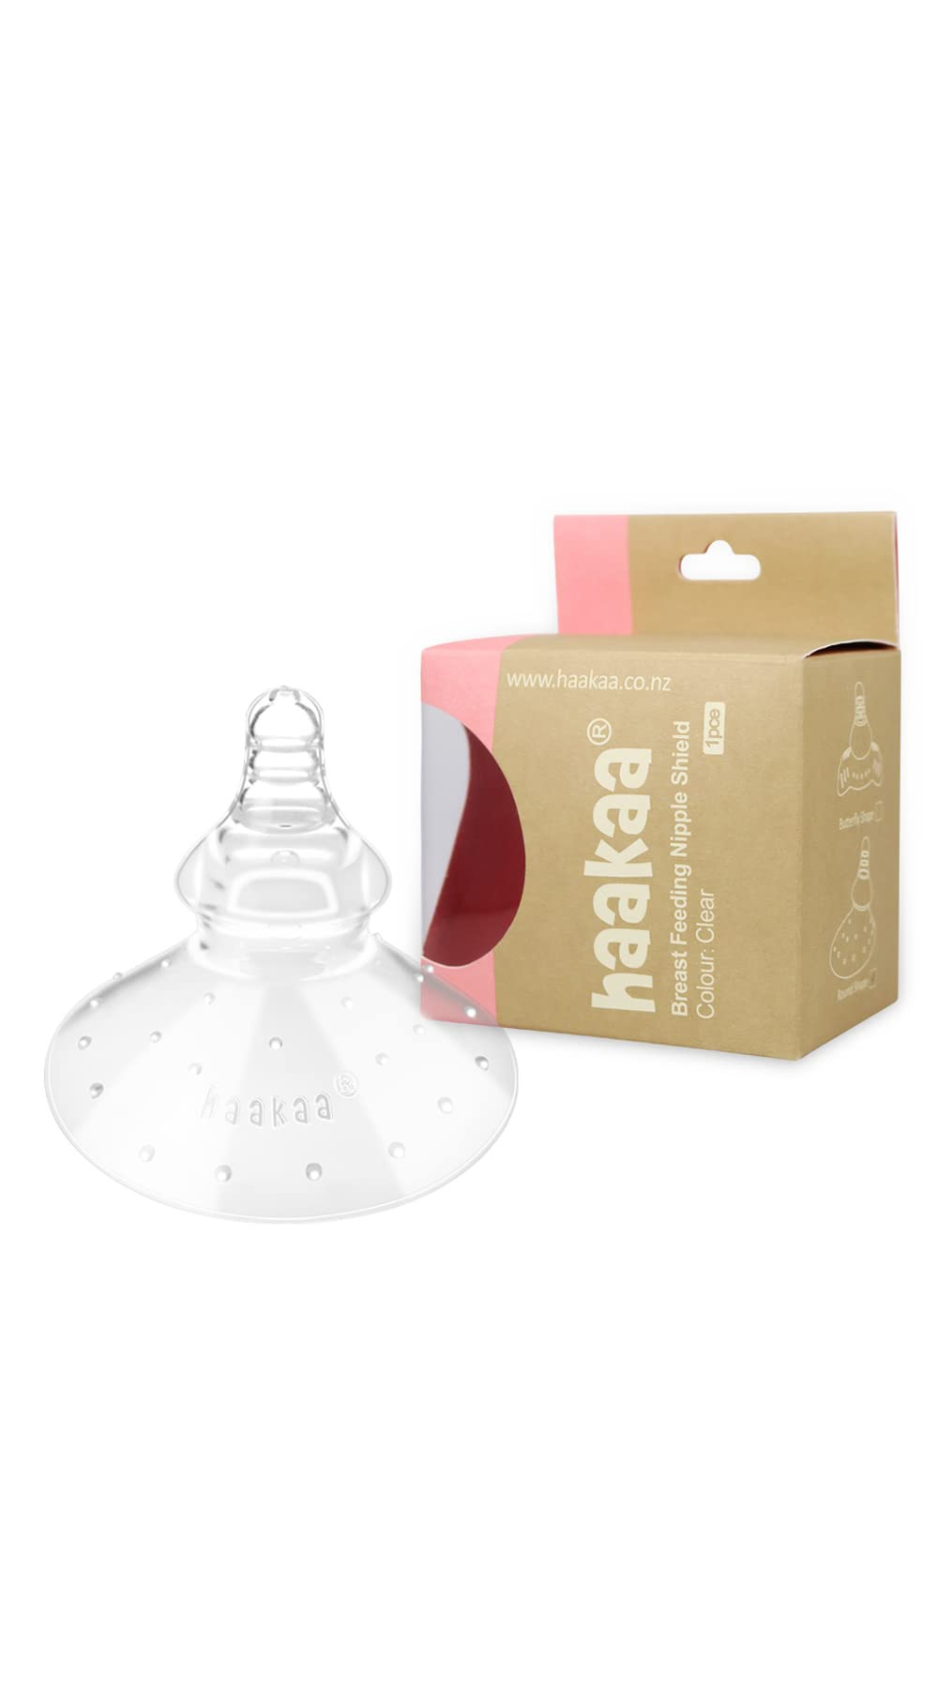 Nipple Shields - Breast Pumps and Nursing Products